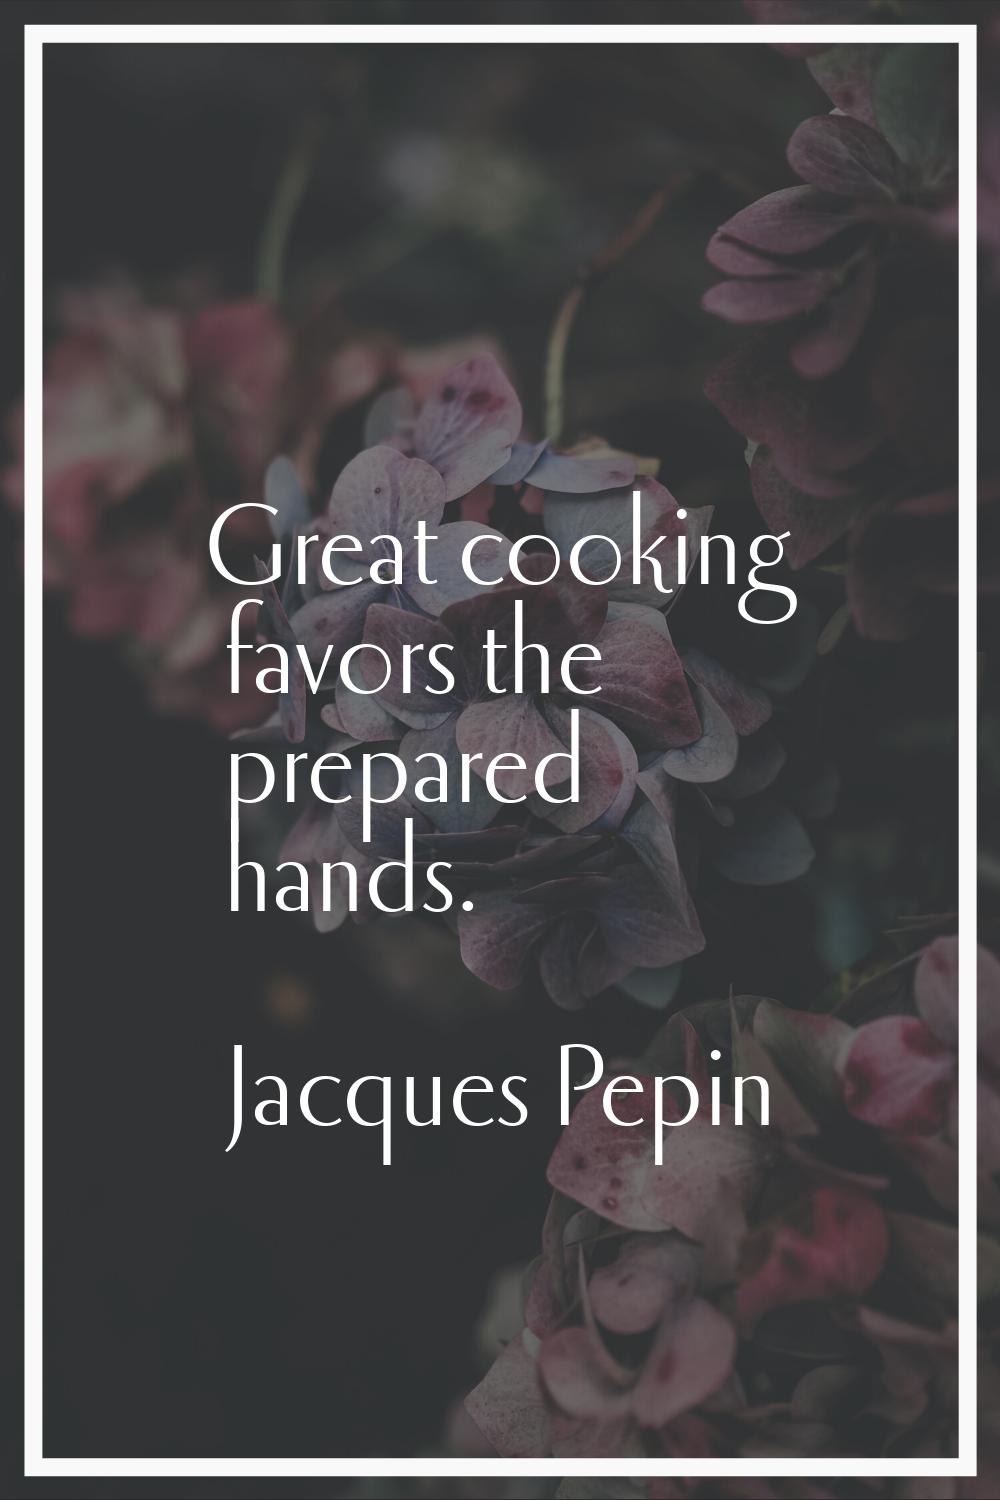 Great cooking favors the prepared hands.